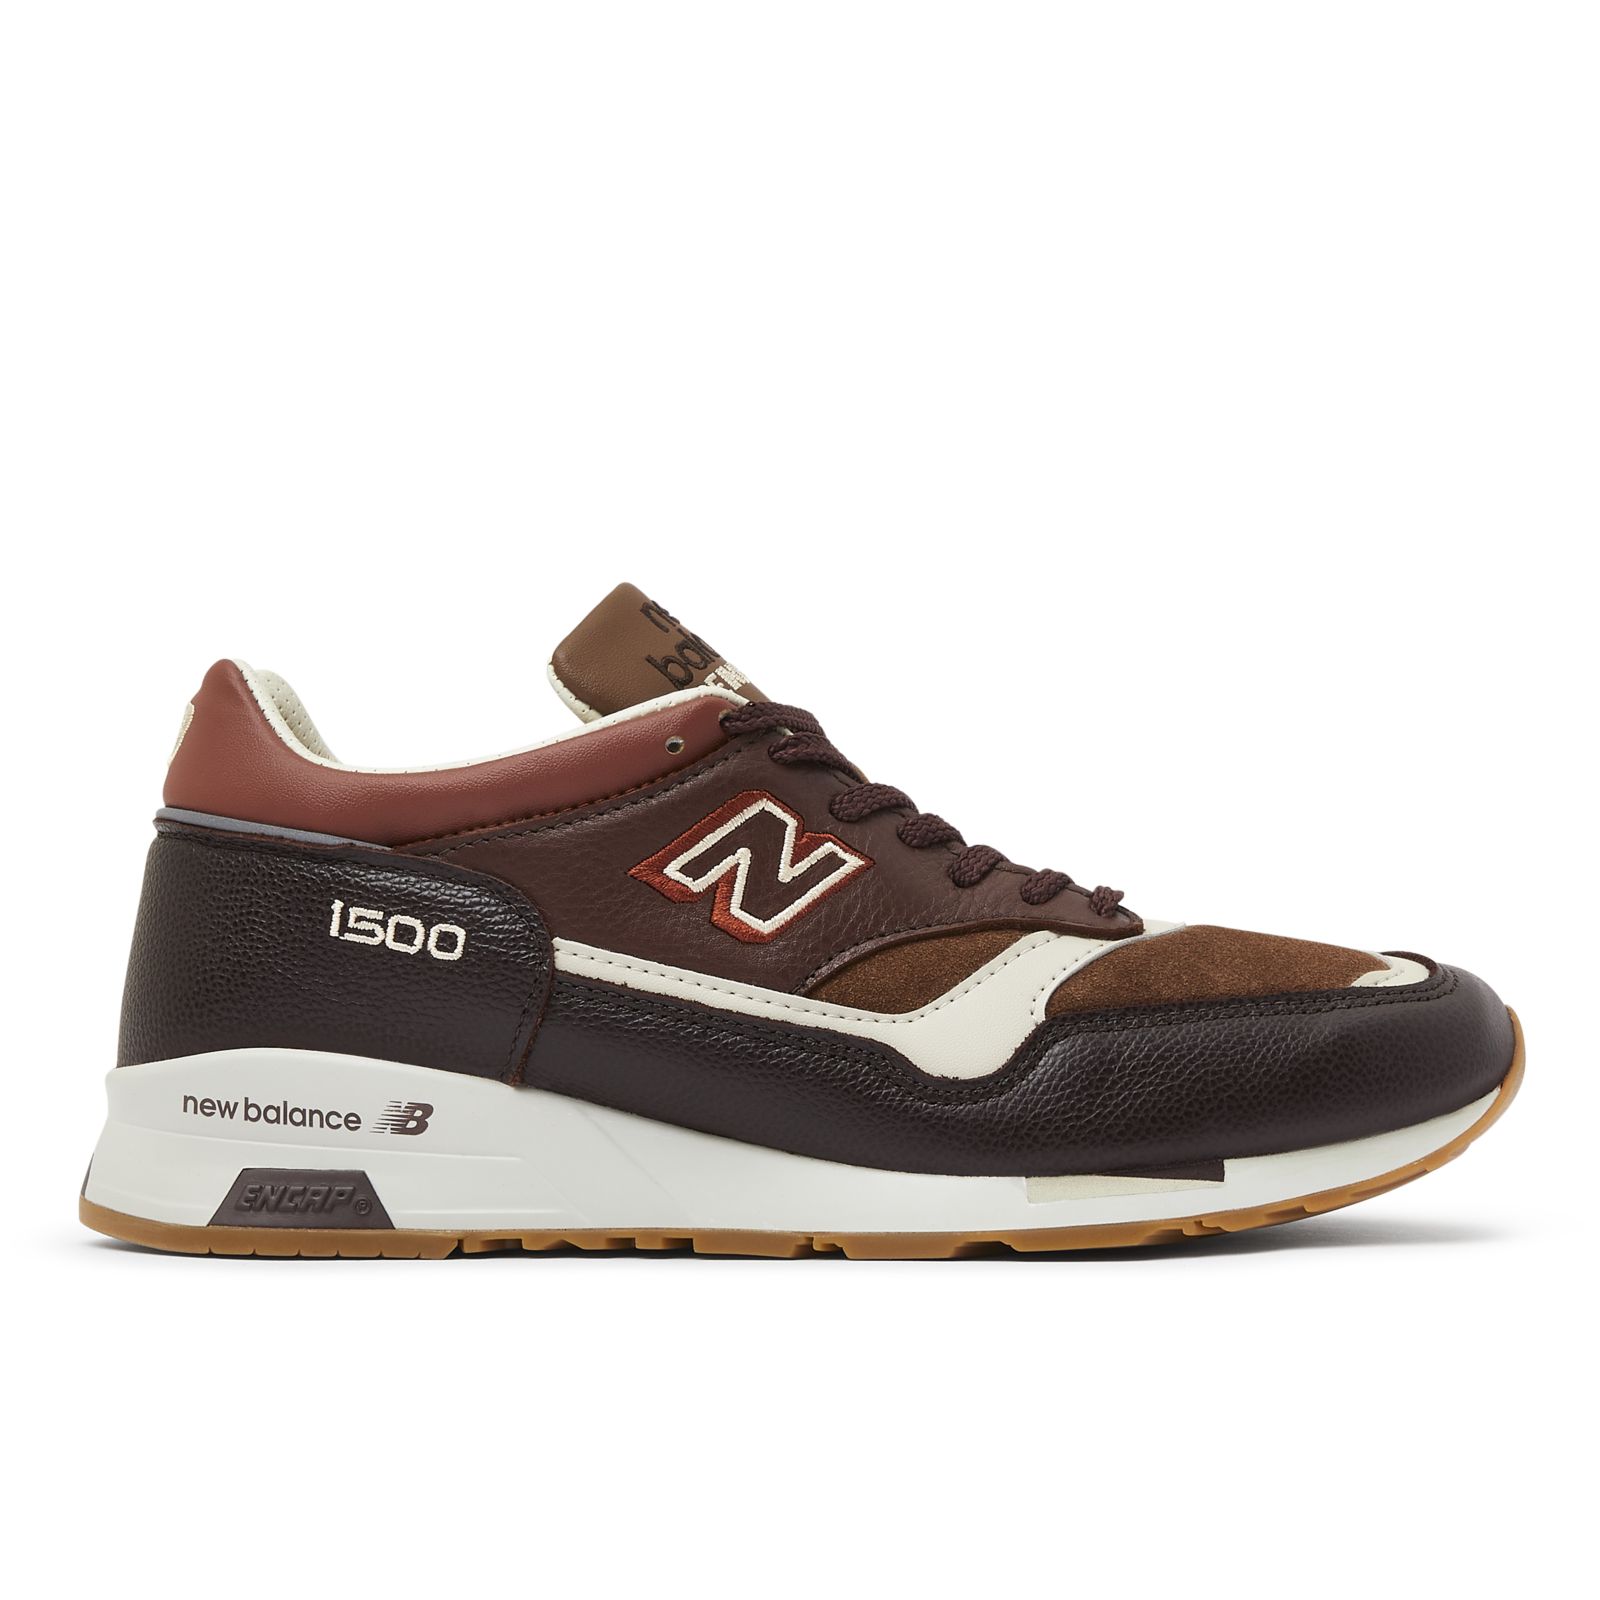 Men's in UK 1500 Shoes New Balance